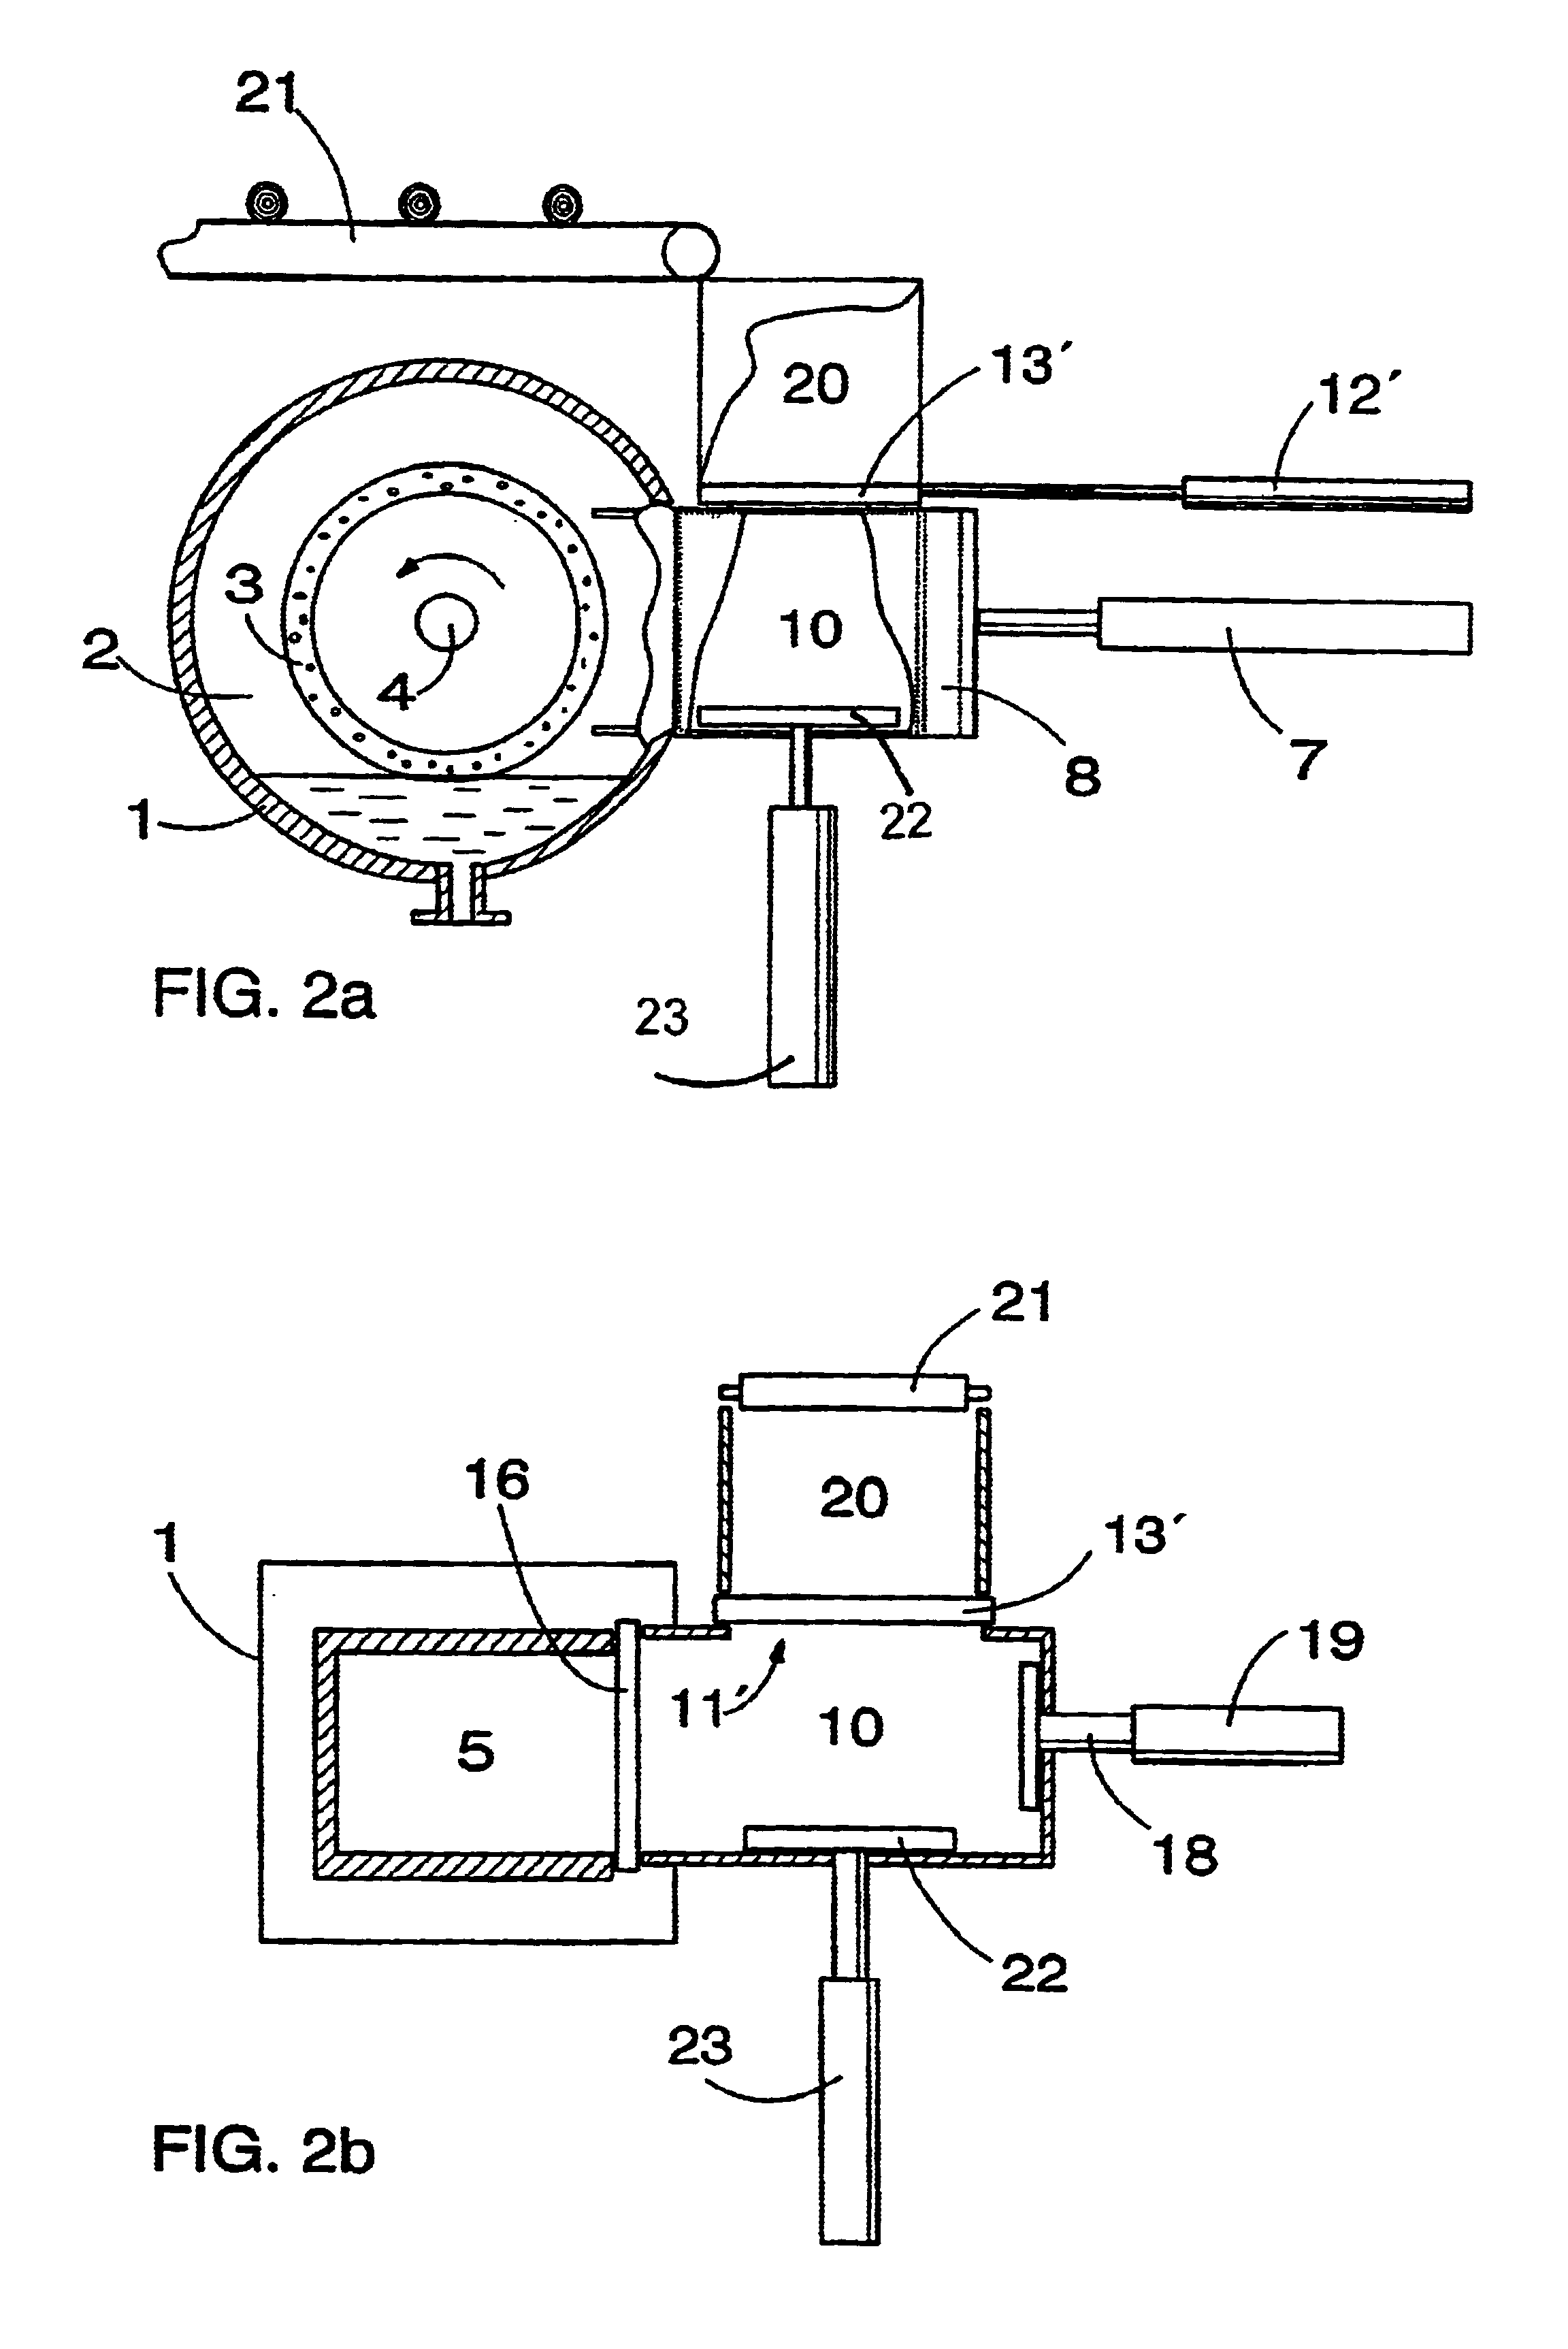 Method and arrangement for feeding wood batches into a pressure grinder